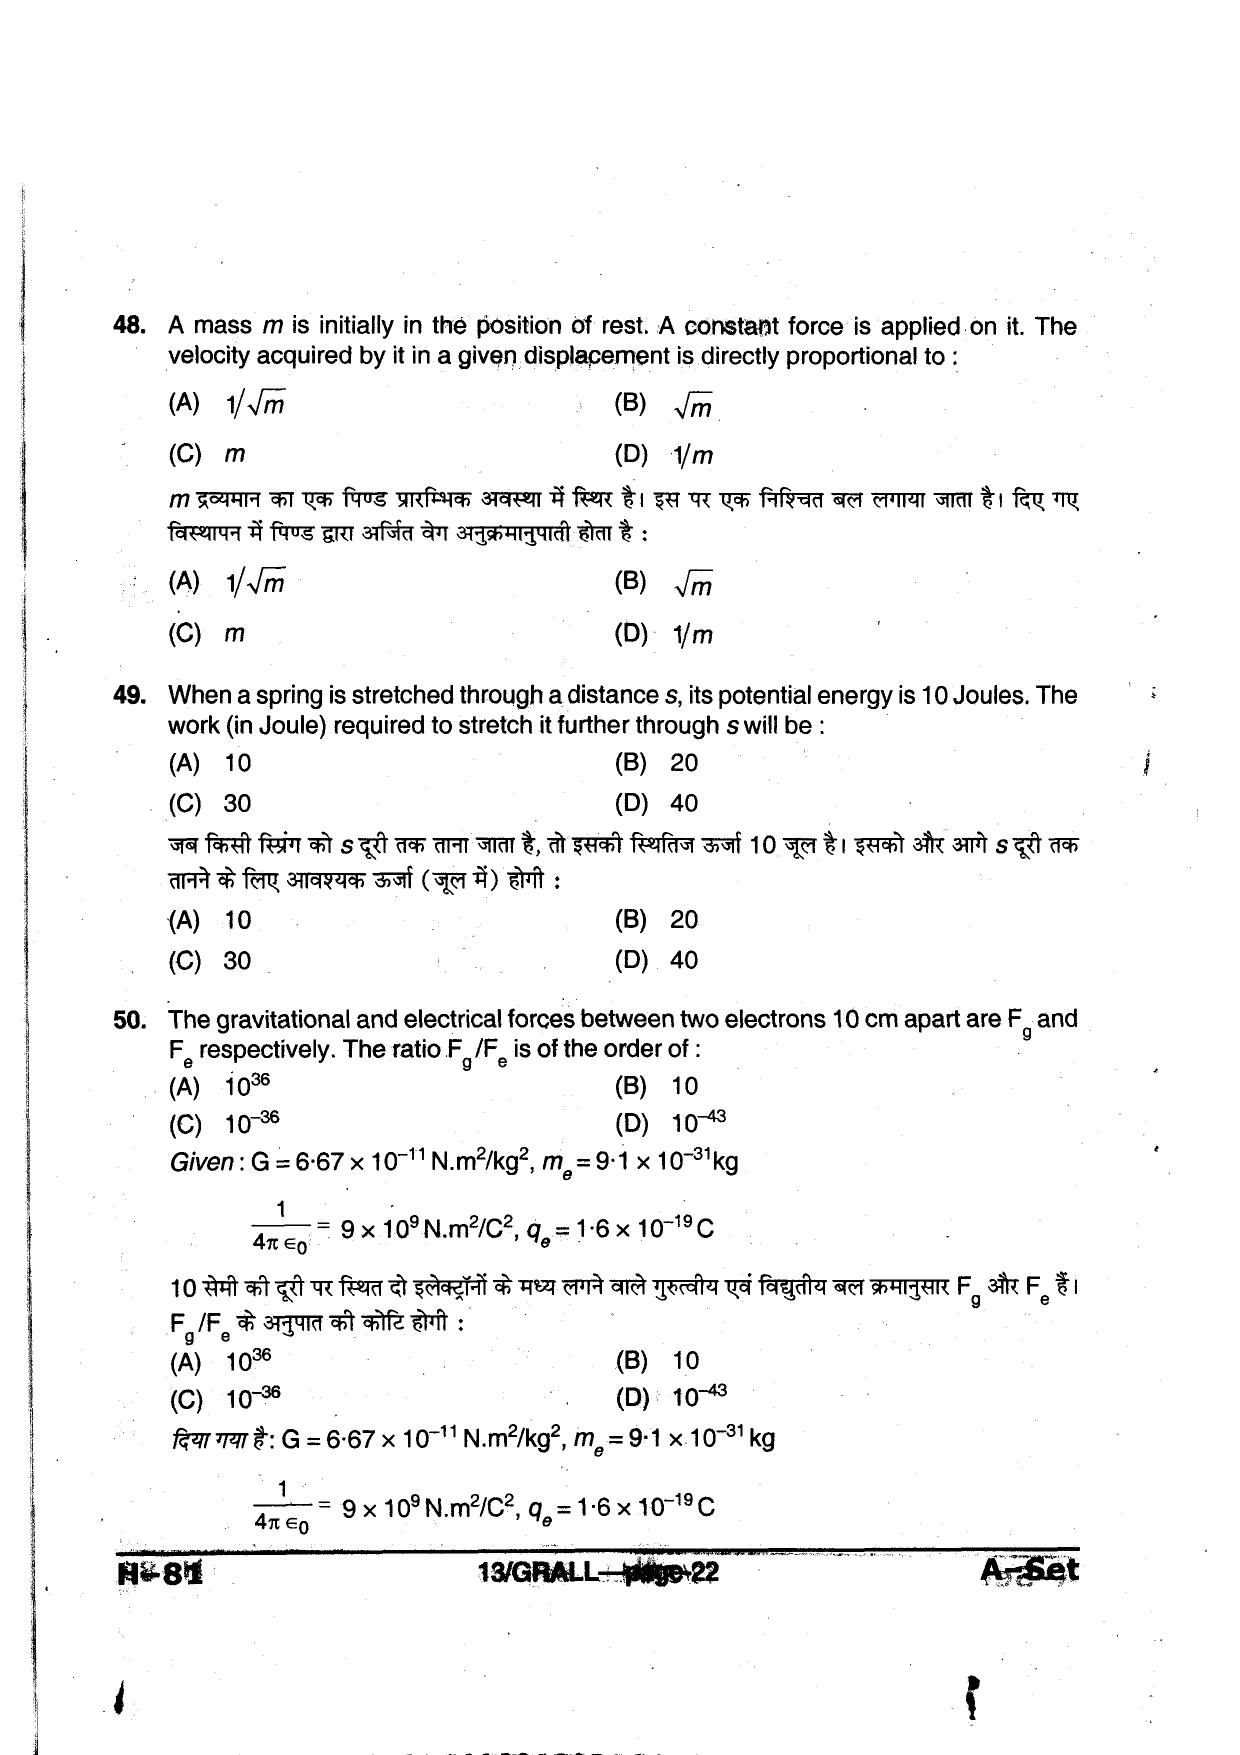 MP PAT 2013 Question Paper - Paper I - Page 22